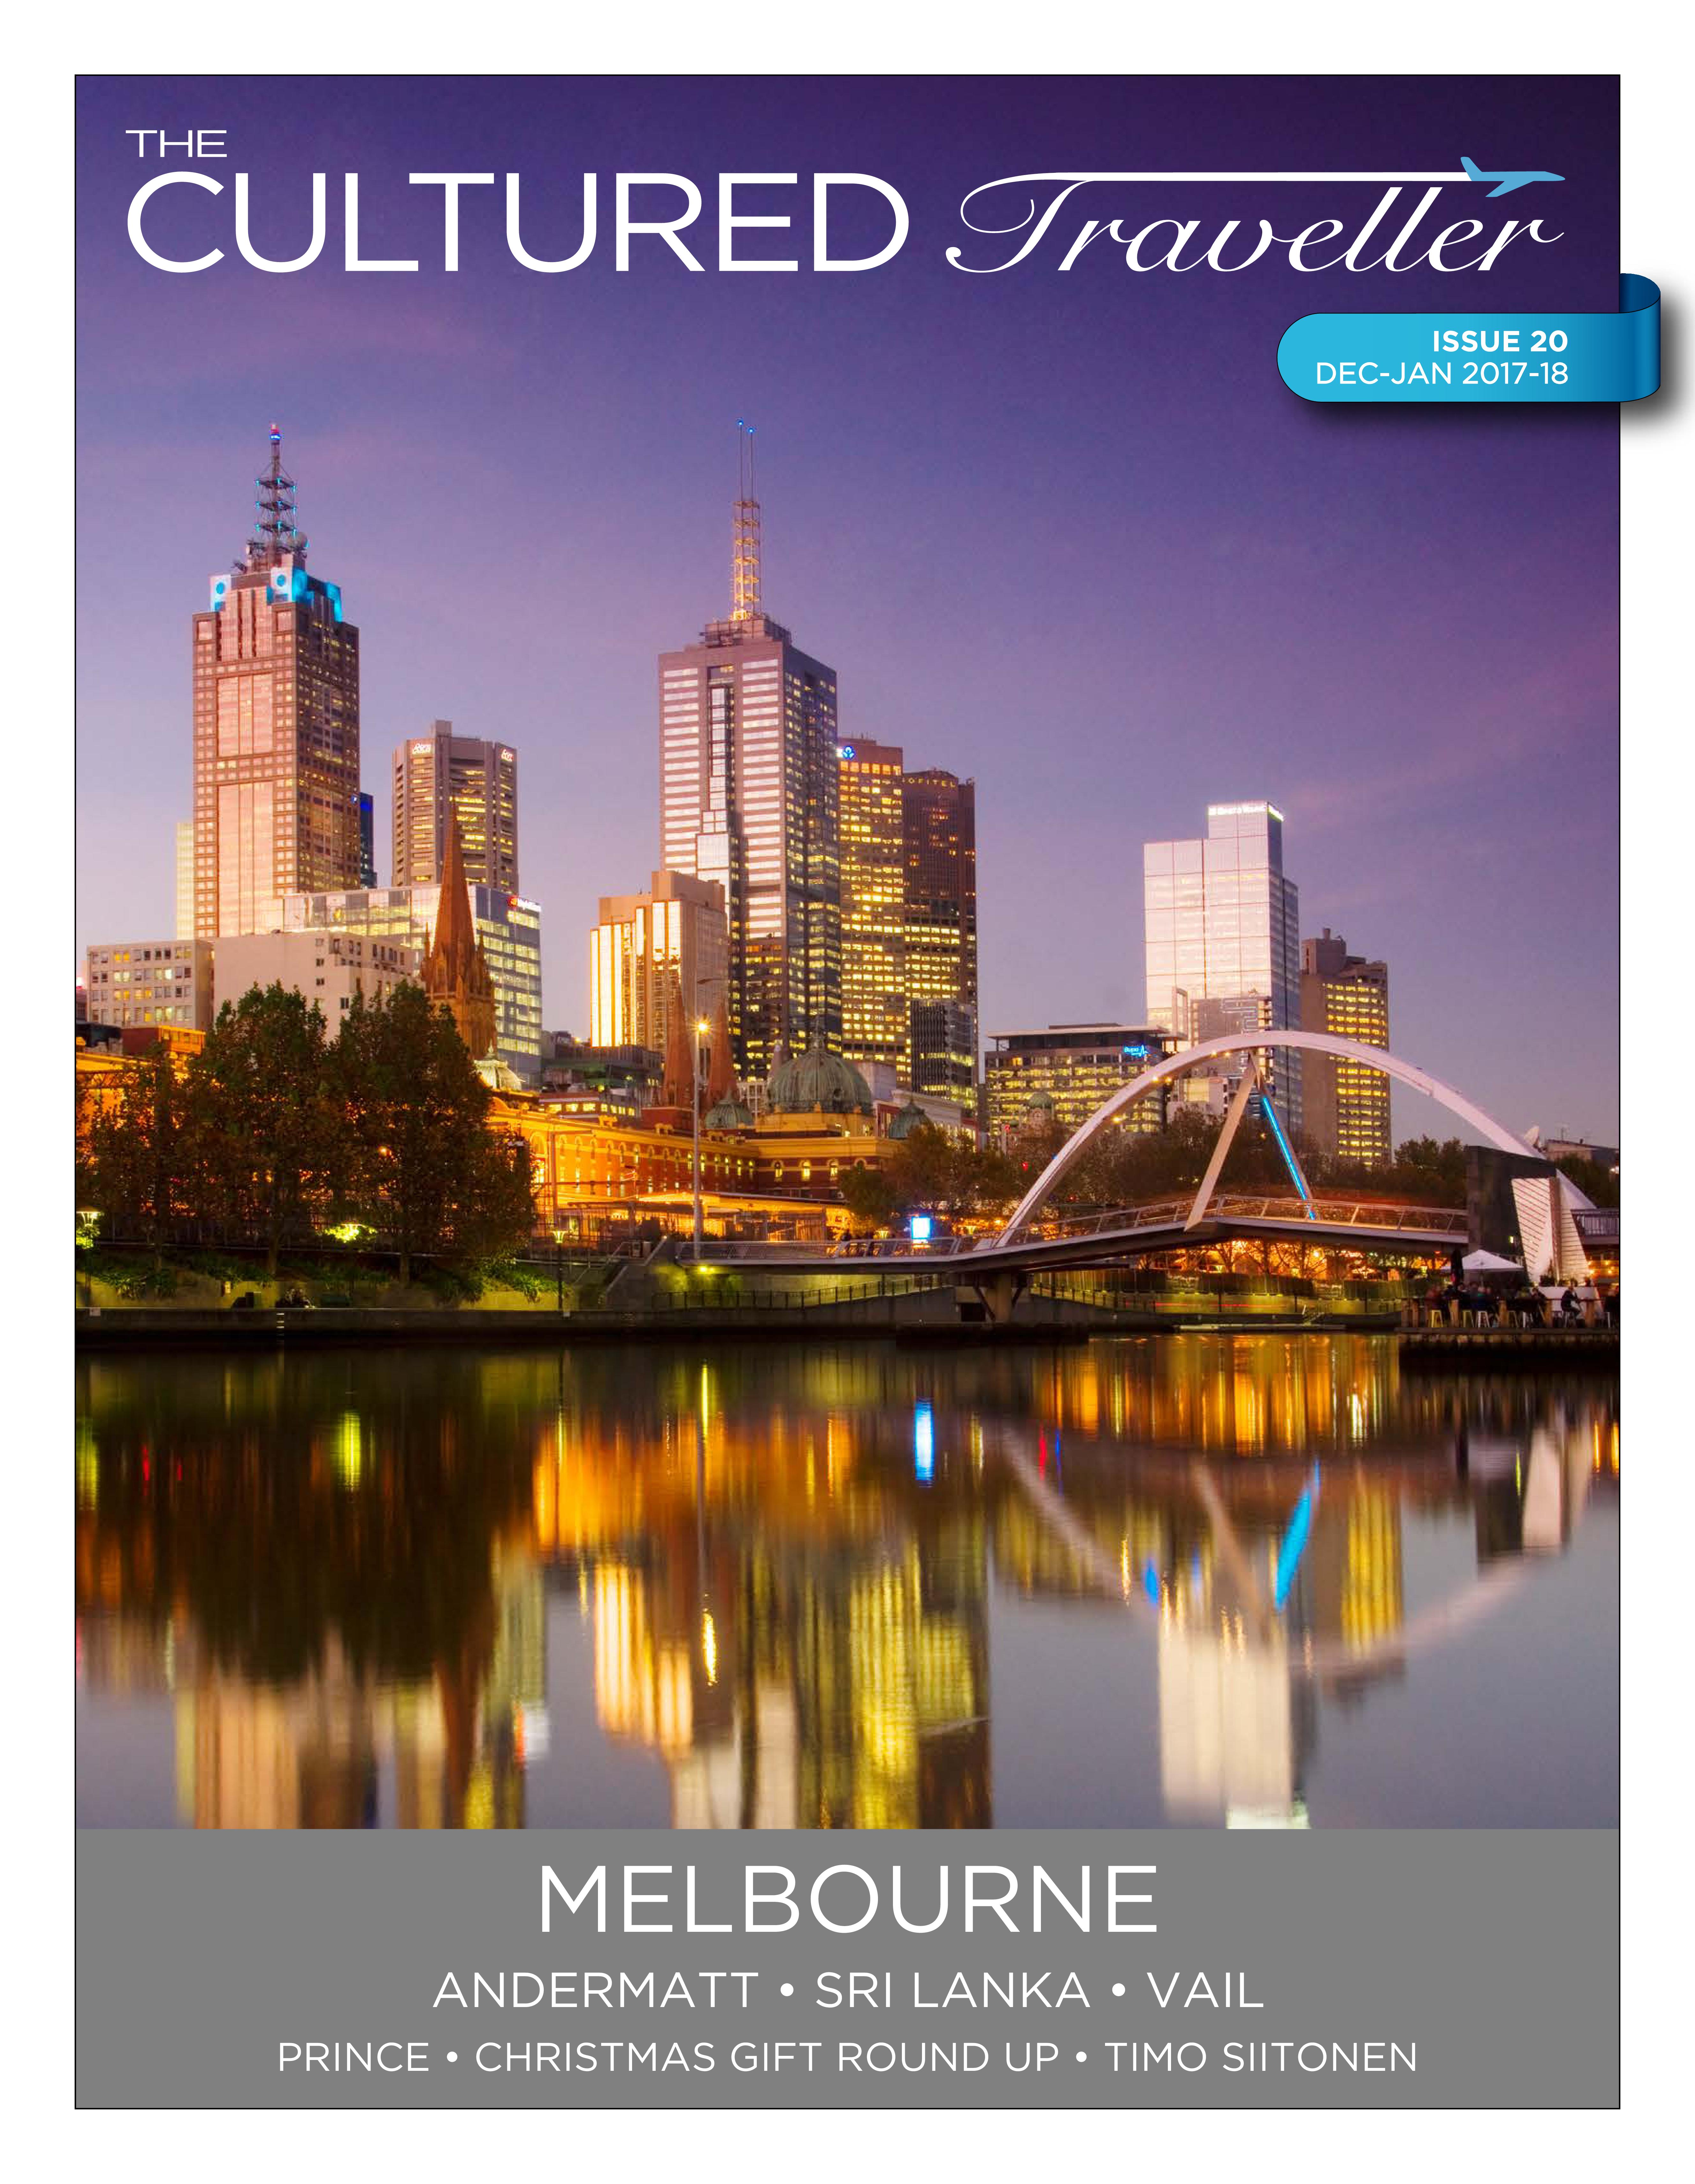 COVER STORY: MELBOURNE